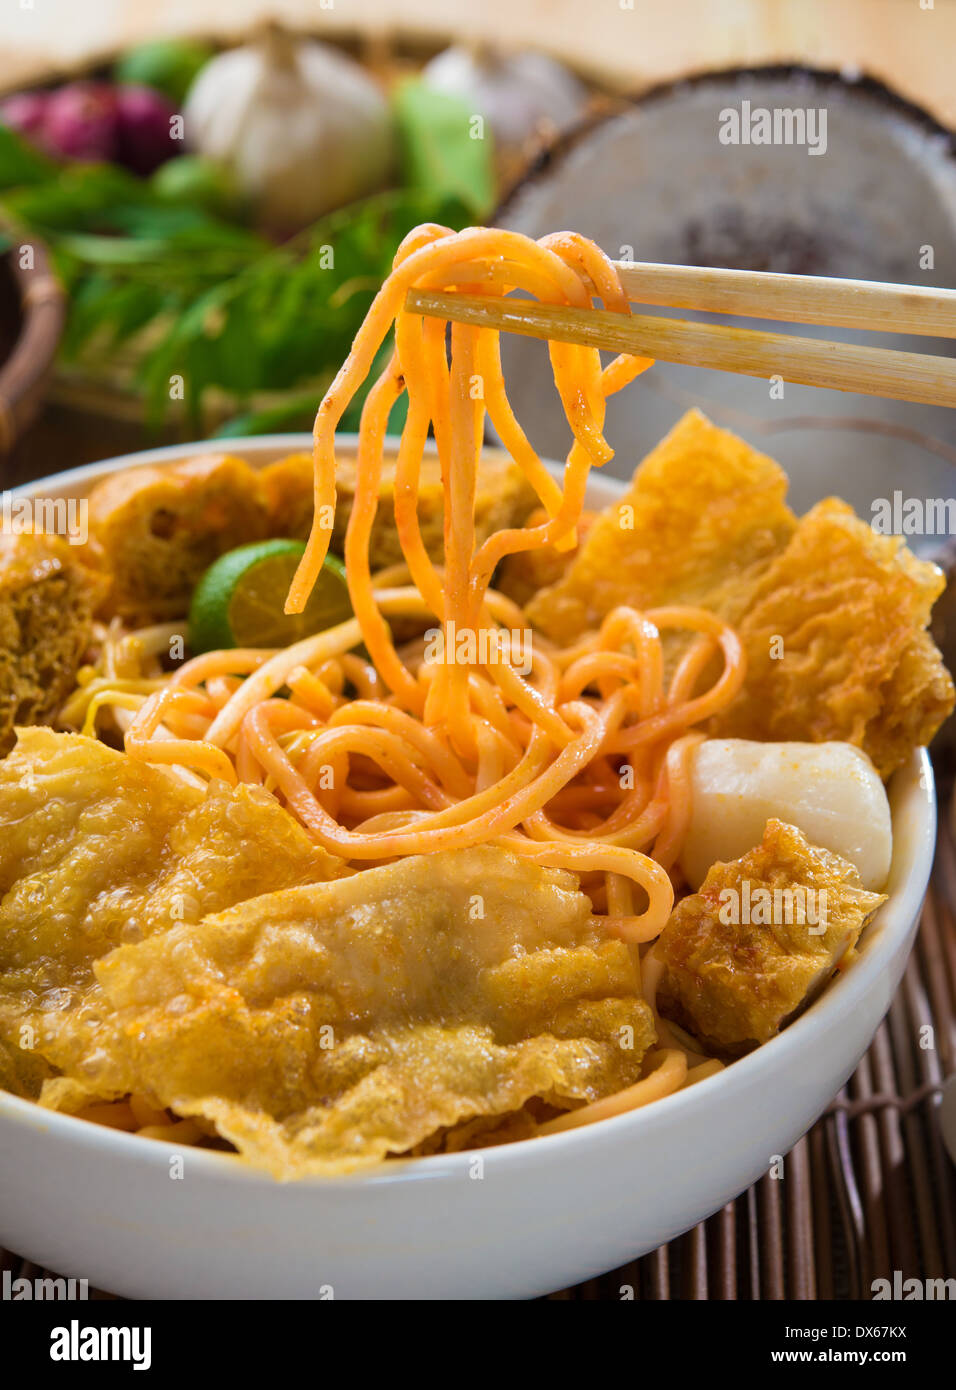 Curry Laksa which is a popular traditional spicy noodle soup from the Peranakan culture in Malaysia and Singapore Stock Photo